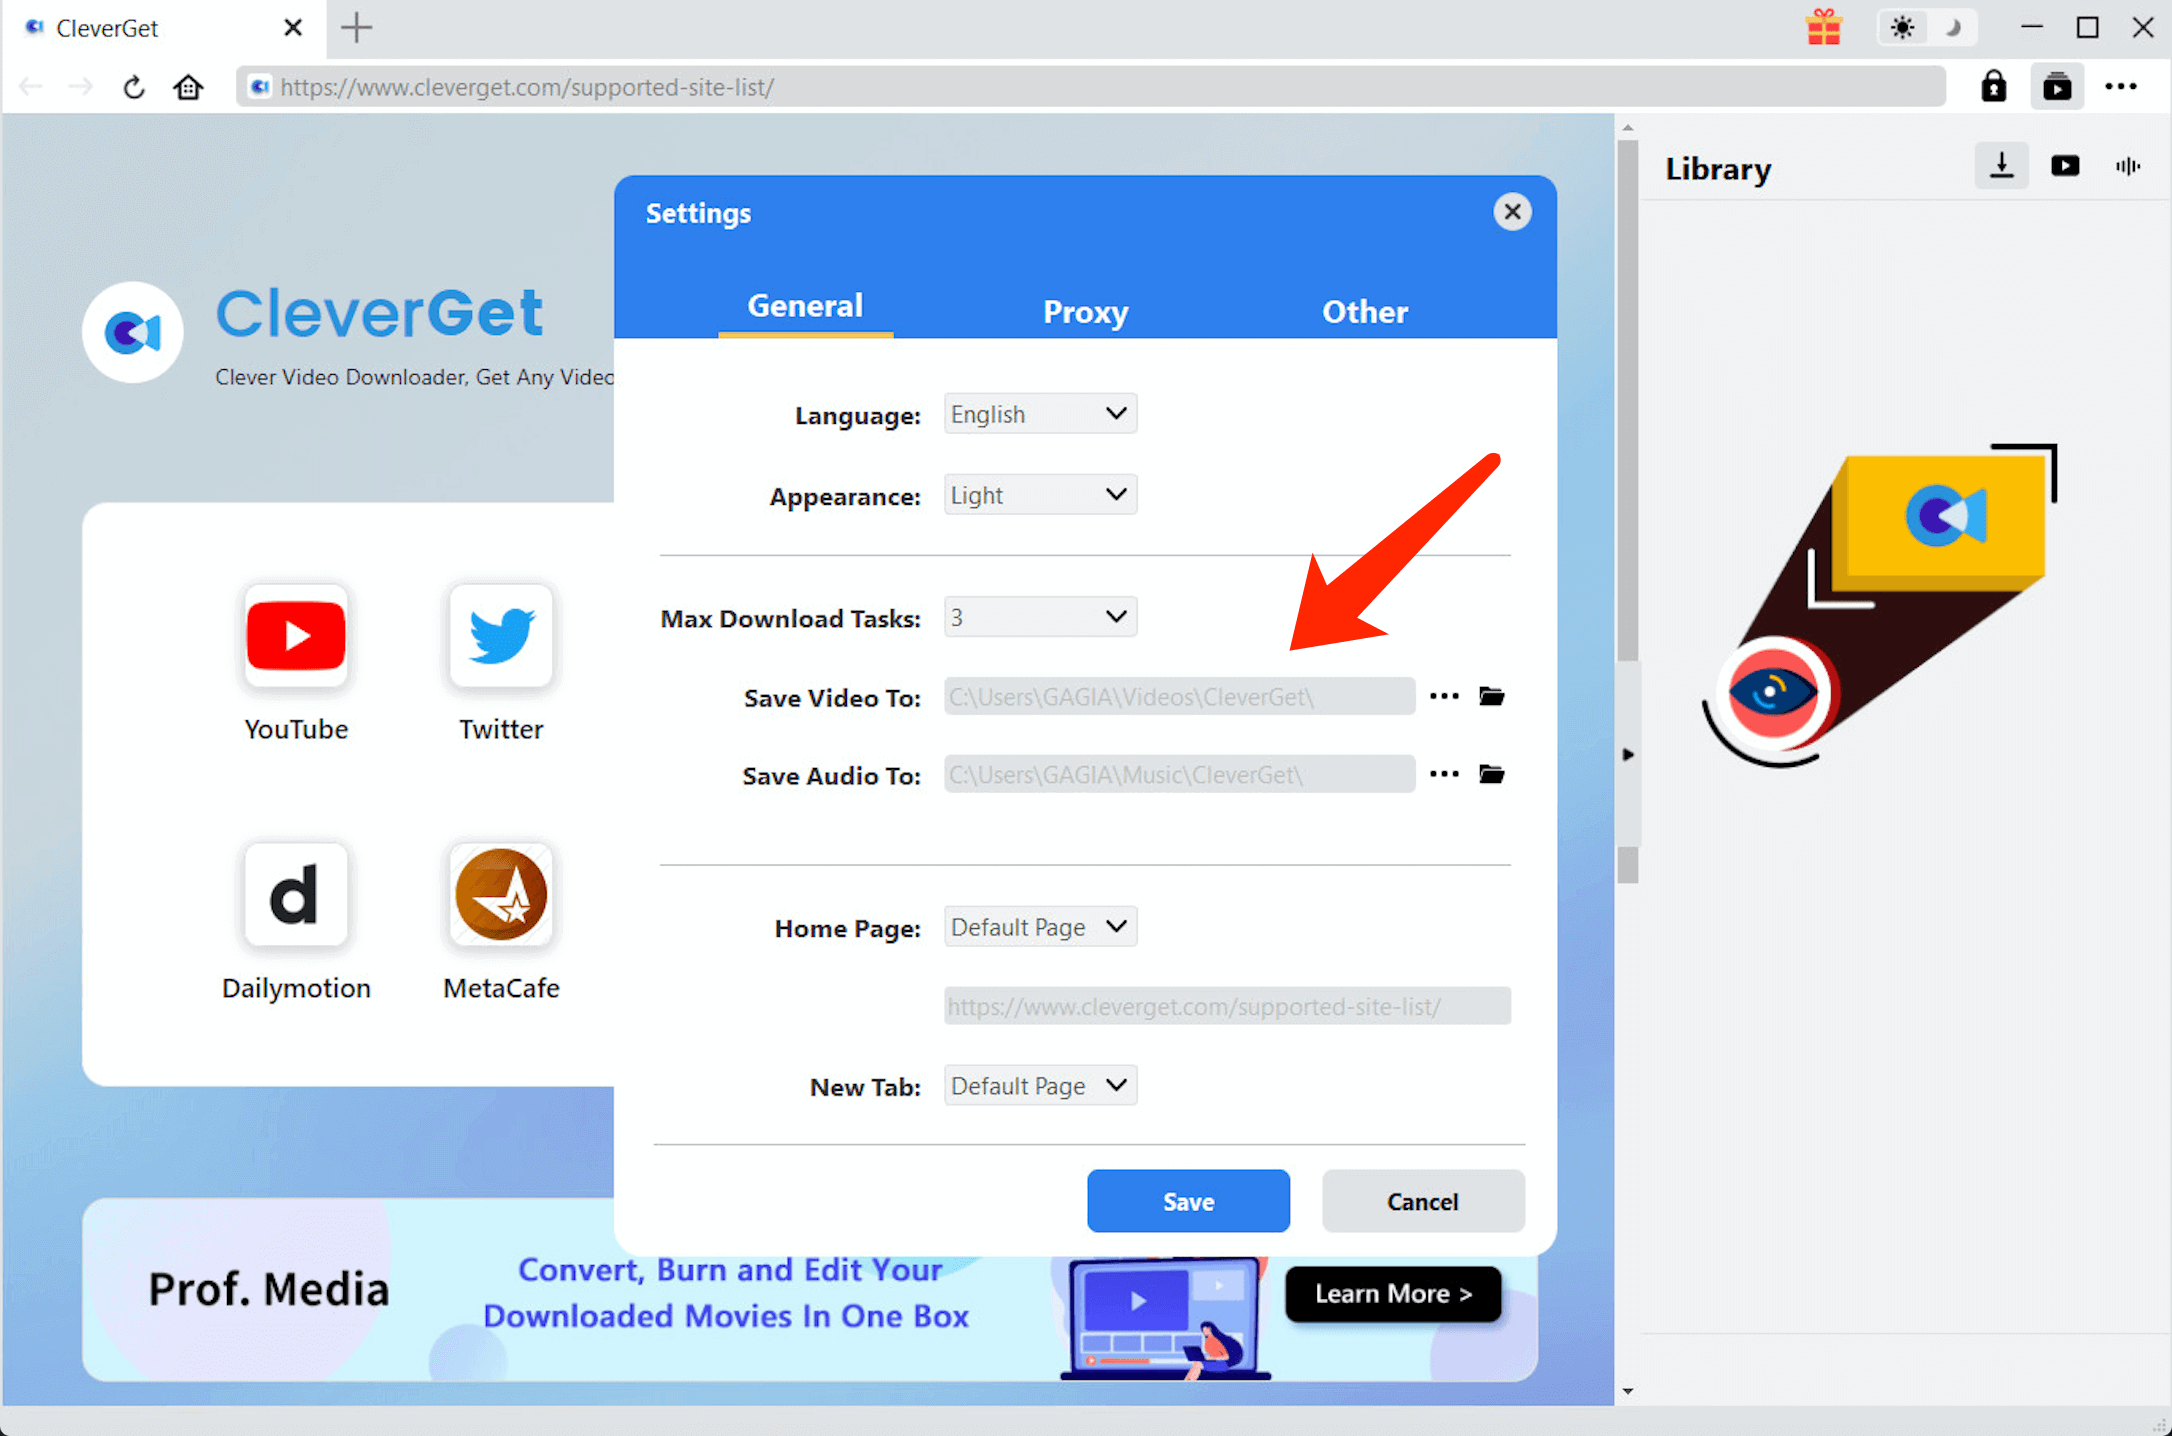  How-to-download-YouTube-videos-with-CleverGet-set-output-directory 